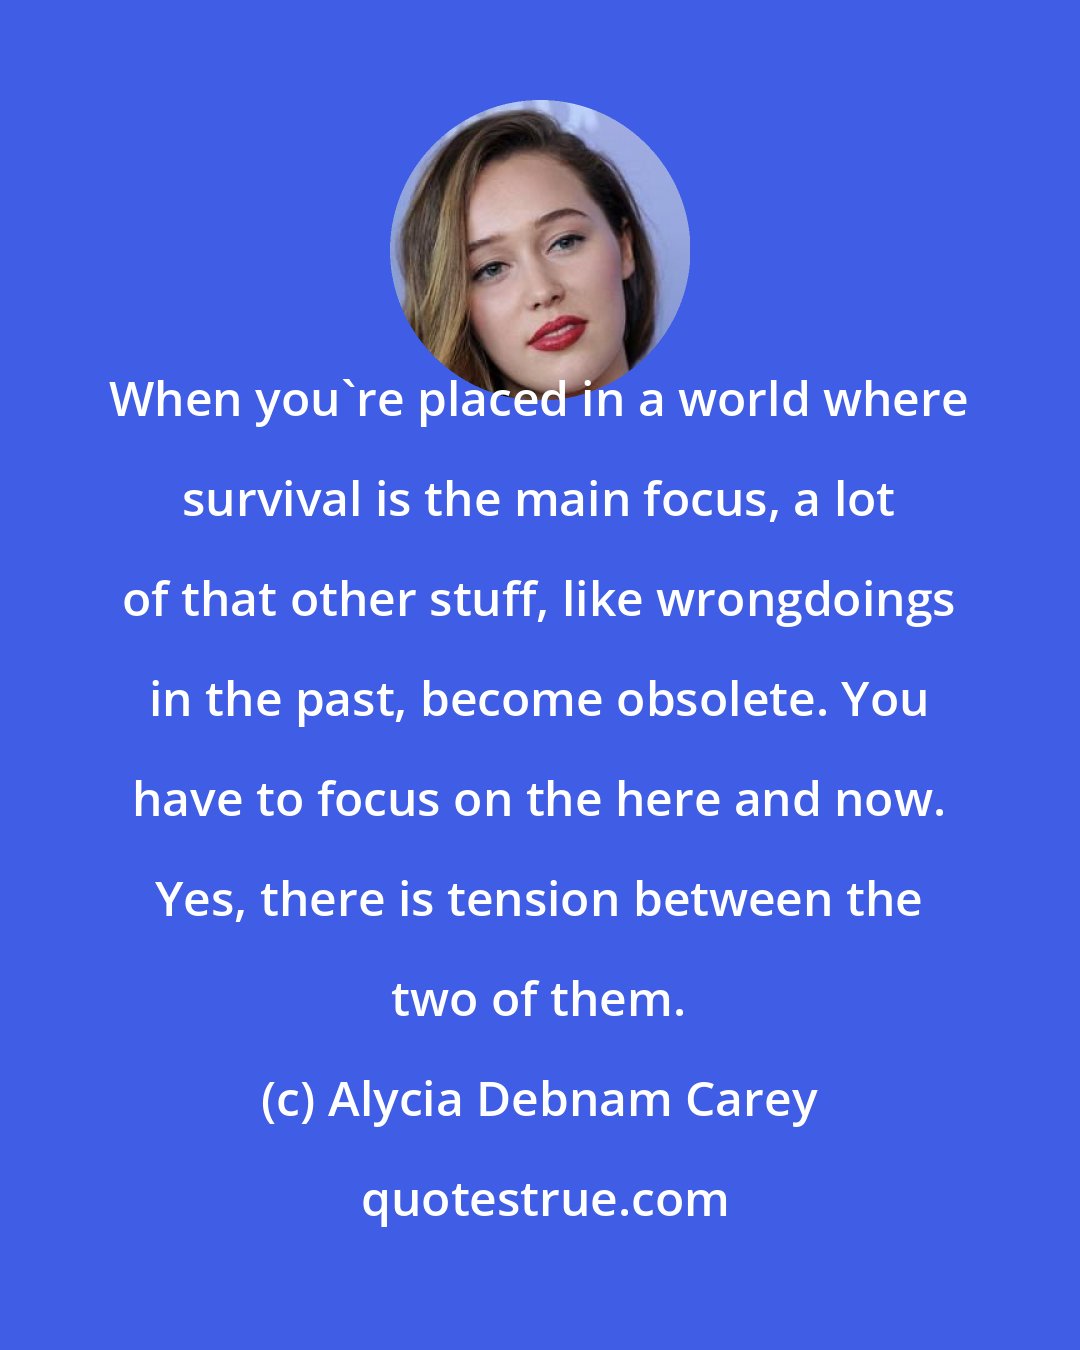 Alycia Debnam Carey: When you're placed in a world where survival is the main focus, a lot of that other stuff, like wrongdoings in the past, become obsolete. You have to focus on the here and now. Yes, there is tension between the two of them.